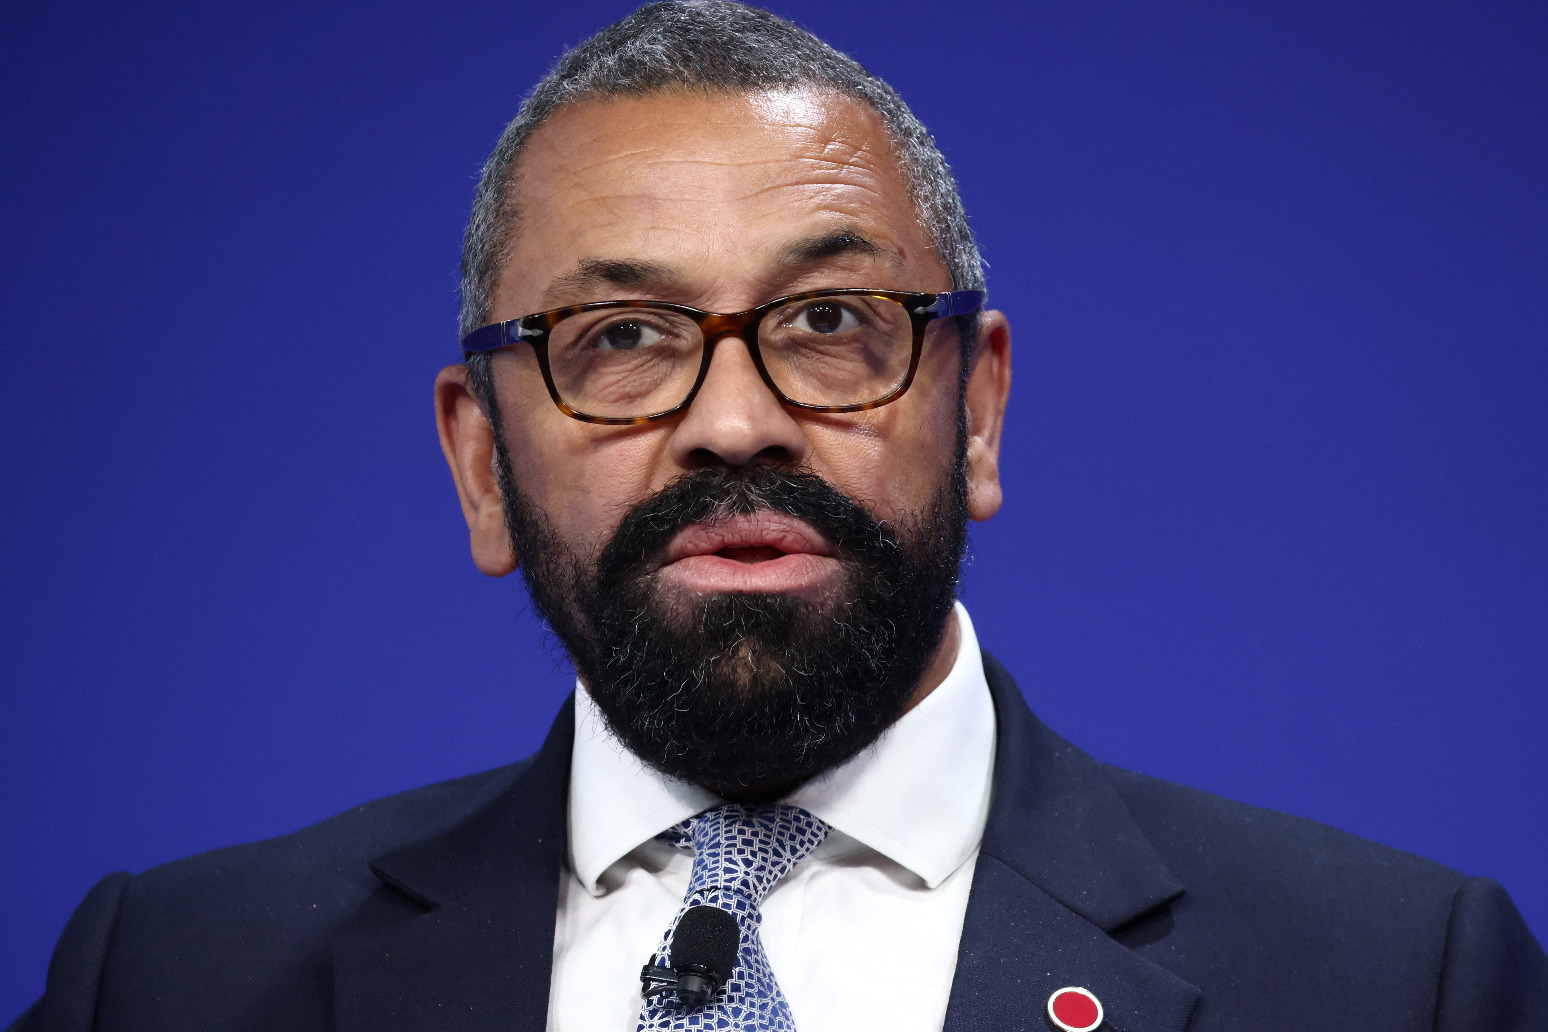 James Cleverly in China for ‘tough conversations’ with counterparts 